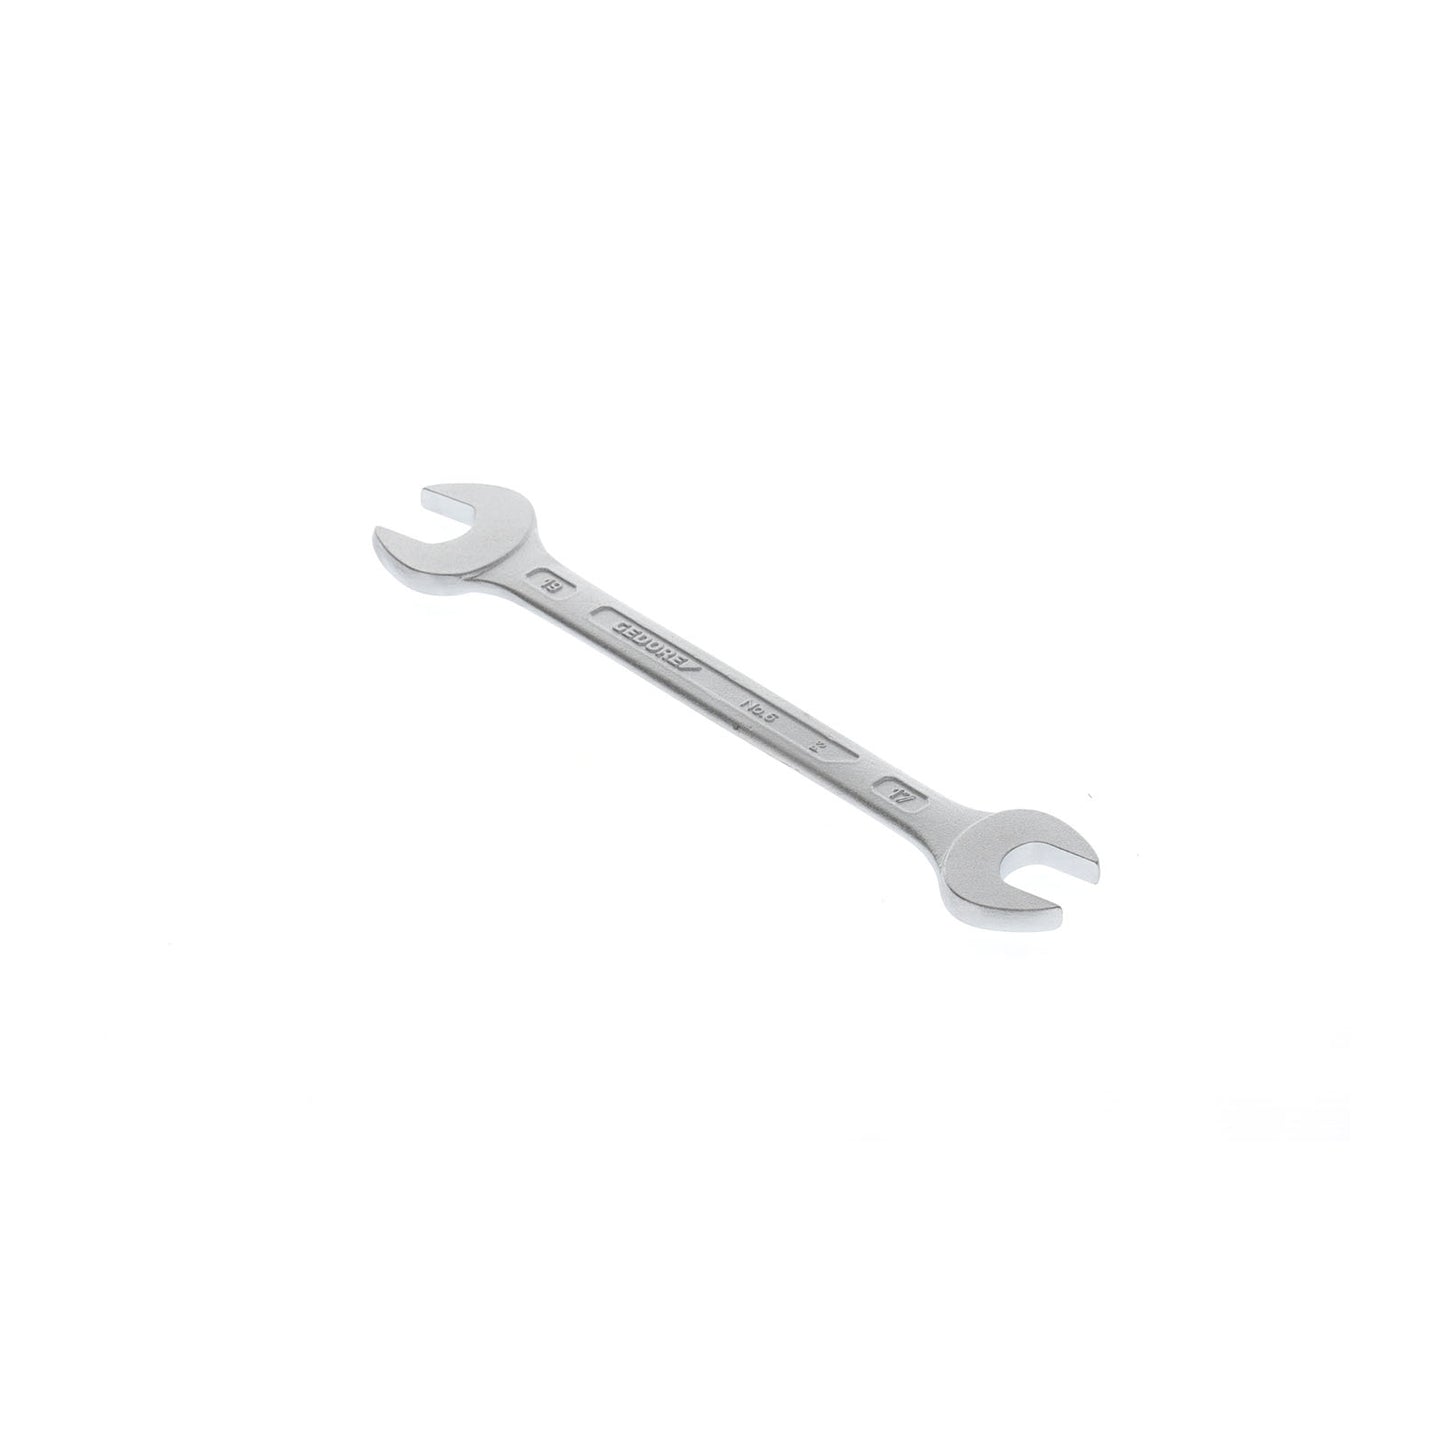 GEDORE 6 17X19 - 2-Mount Fixed Wrench, 17x19 (6066420)